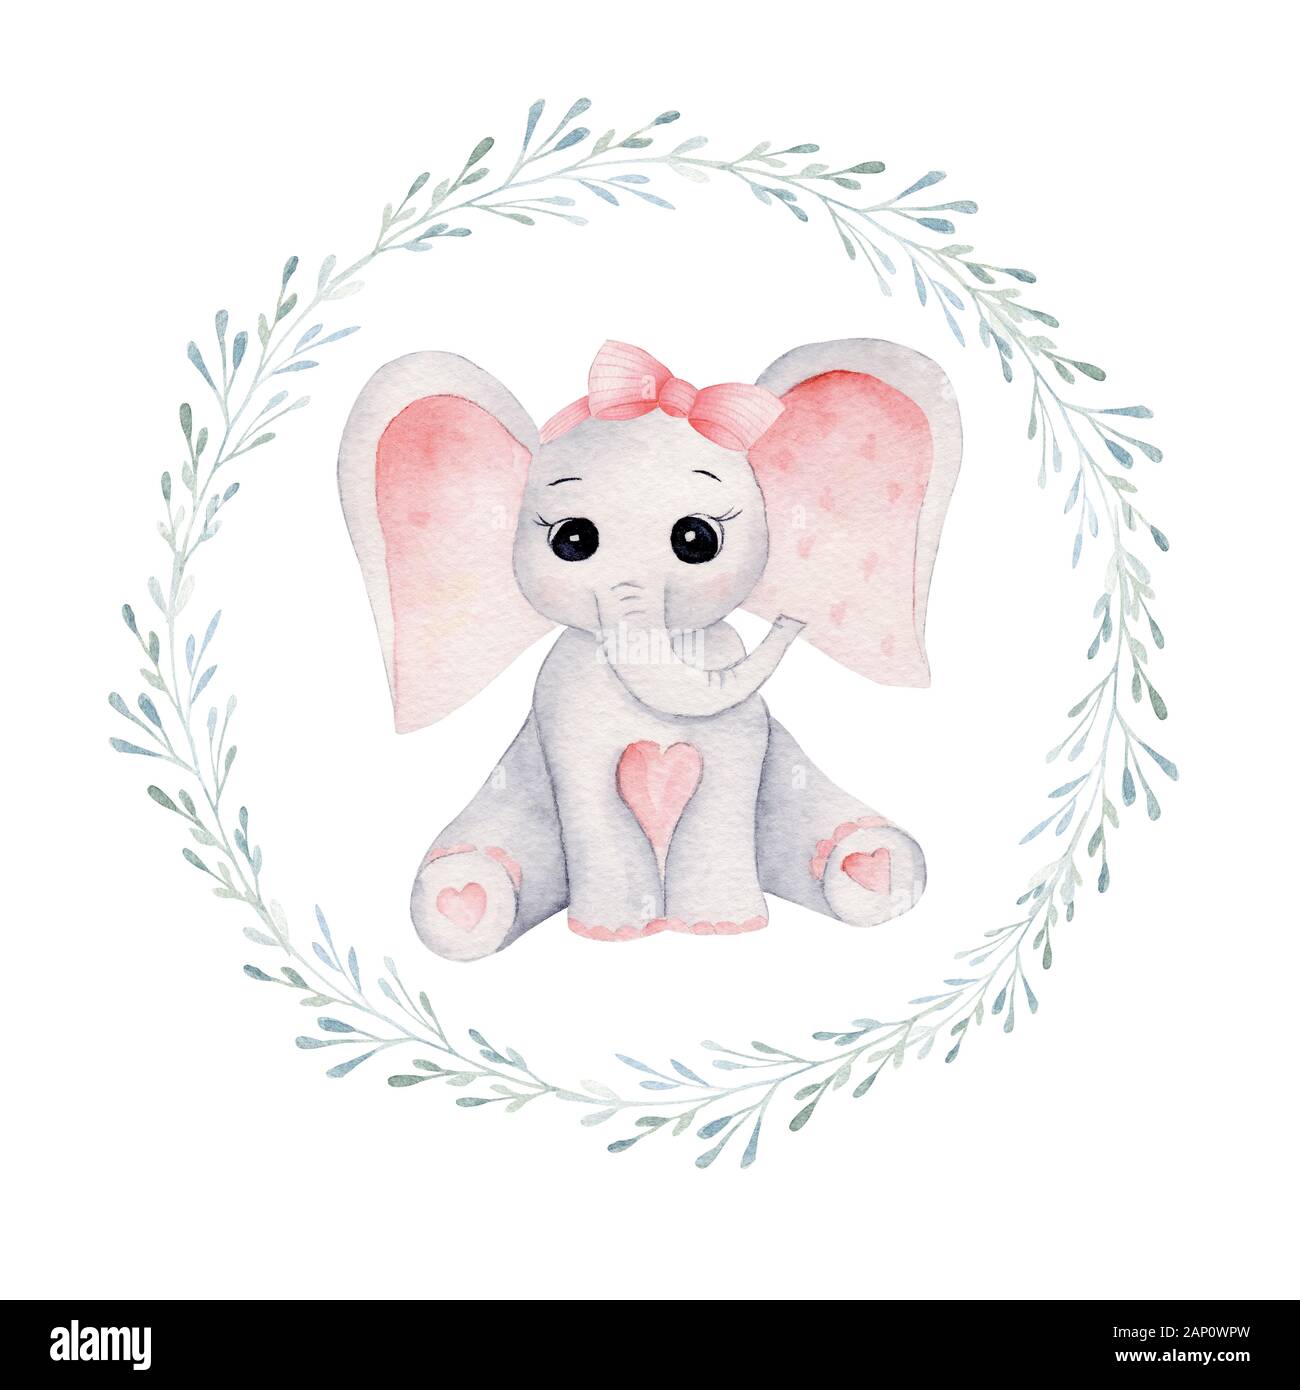 Elephant calf in floral frame hand drawn raster illustration. Animal girl and plant twigs with leaves isolated watercolor composition. Baby elephant i Stock Photo